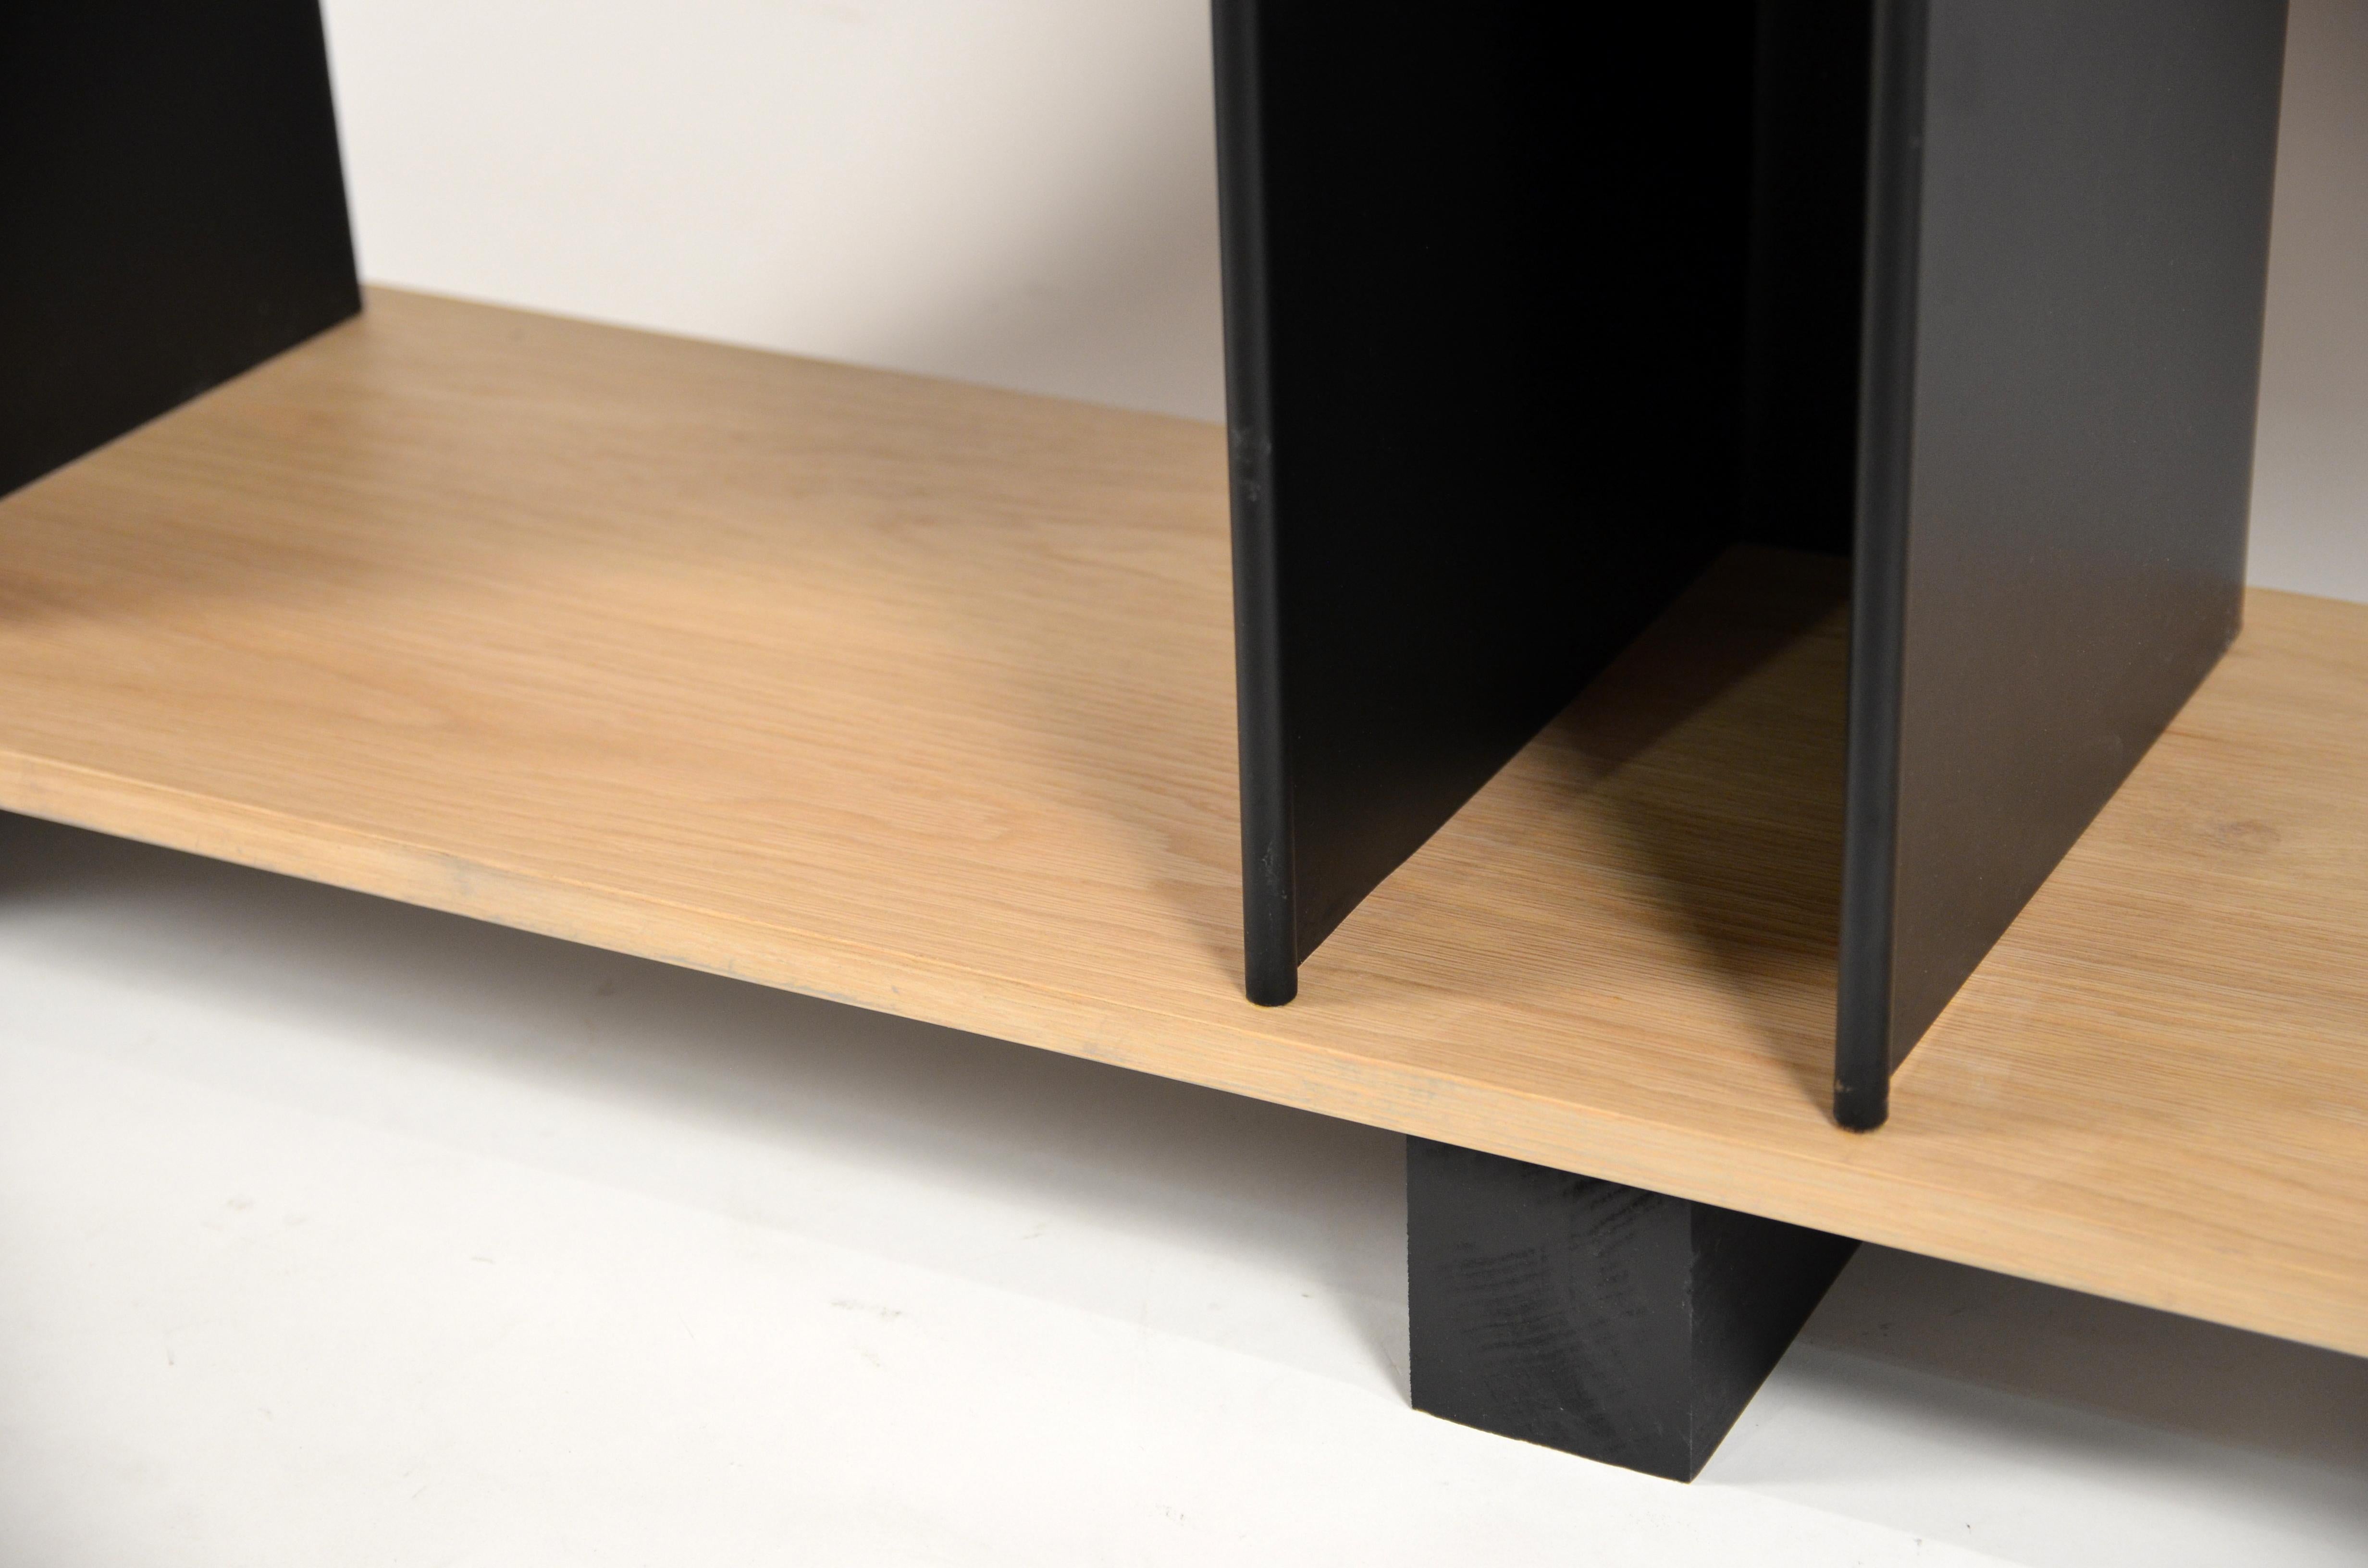 Tall 'Horizontale' Black Steel and Oak Shelving Unit by Design Frères In New Condition For Sale In Los Angeles, CA